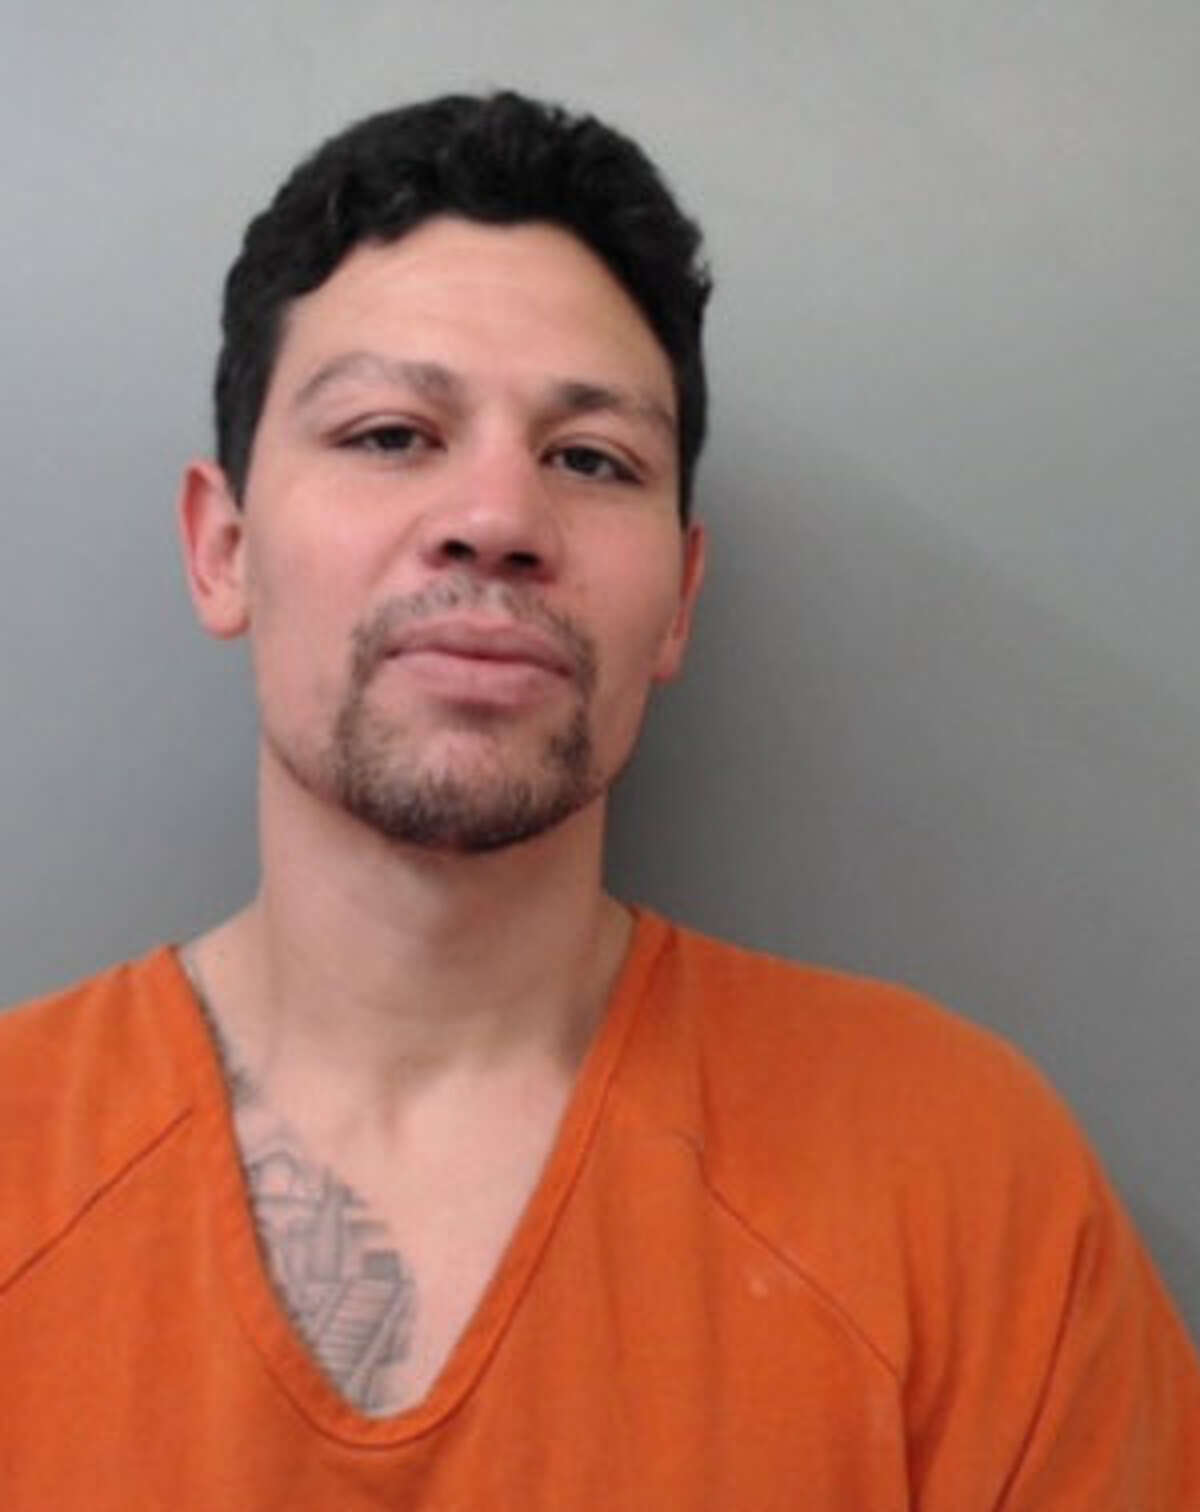 Ricardo Ercia, 34, was charged via a warrant with burglary of a habitation and theft.